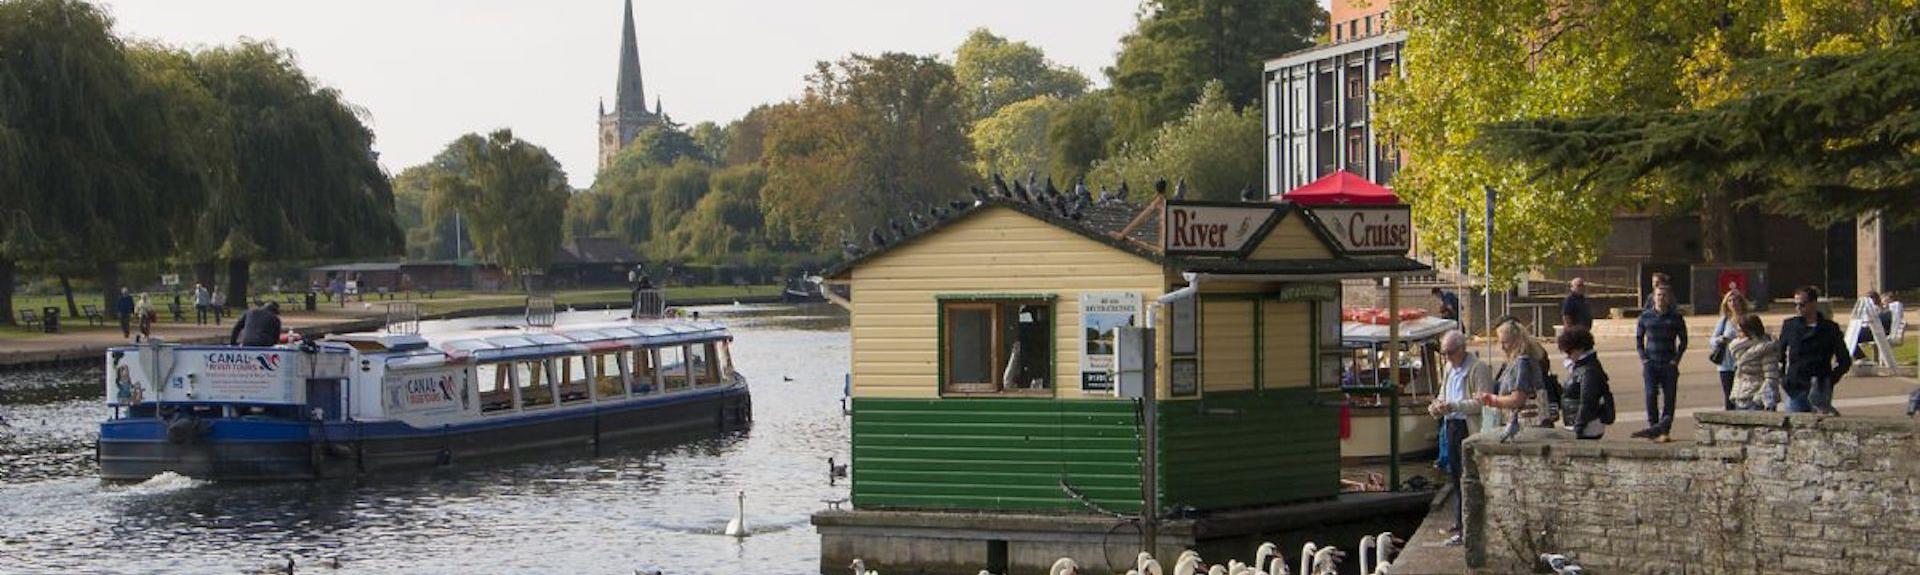 A riveerside location with a river cruise boat. Ducks and swans are being fed from a stone, tree-lined treeside. 